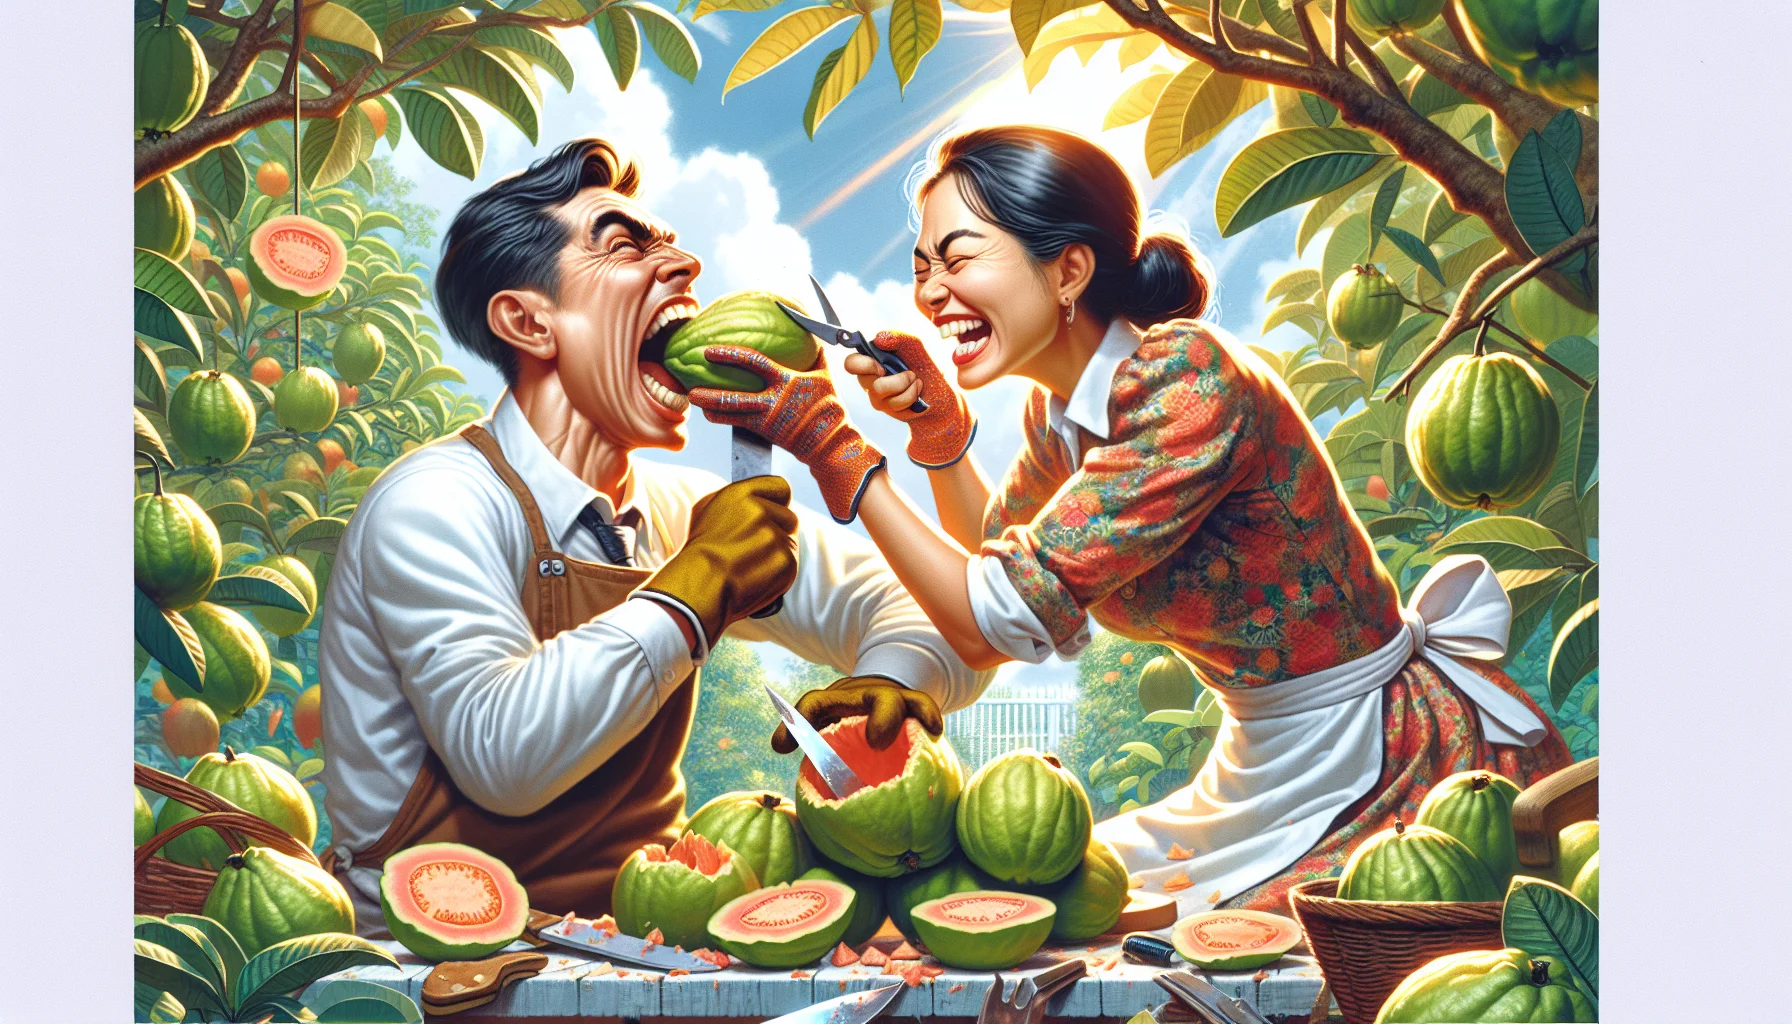 A colorful and humorous scene depicting a South Asian woman and a Caucasian man in a lush garden, surrounded by guava trees. The man is comically struggling to bite into a whole guava while the woman, expertly slicing another ripe guava with a small knife, is laughing heartily. Their attire implies that they've been actively gardening together, denoted by gloves, aprons, and gardening tools scattered around. Bright sunshine filters through the canopy of the trees, adding a warm, inviting atmosphere. The expression on their faces and vibrancy of the scene encourages the joy of gardening and the pleasure of eating homegrown fruit.